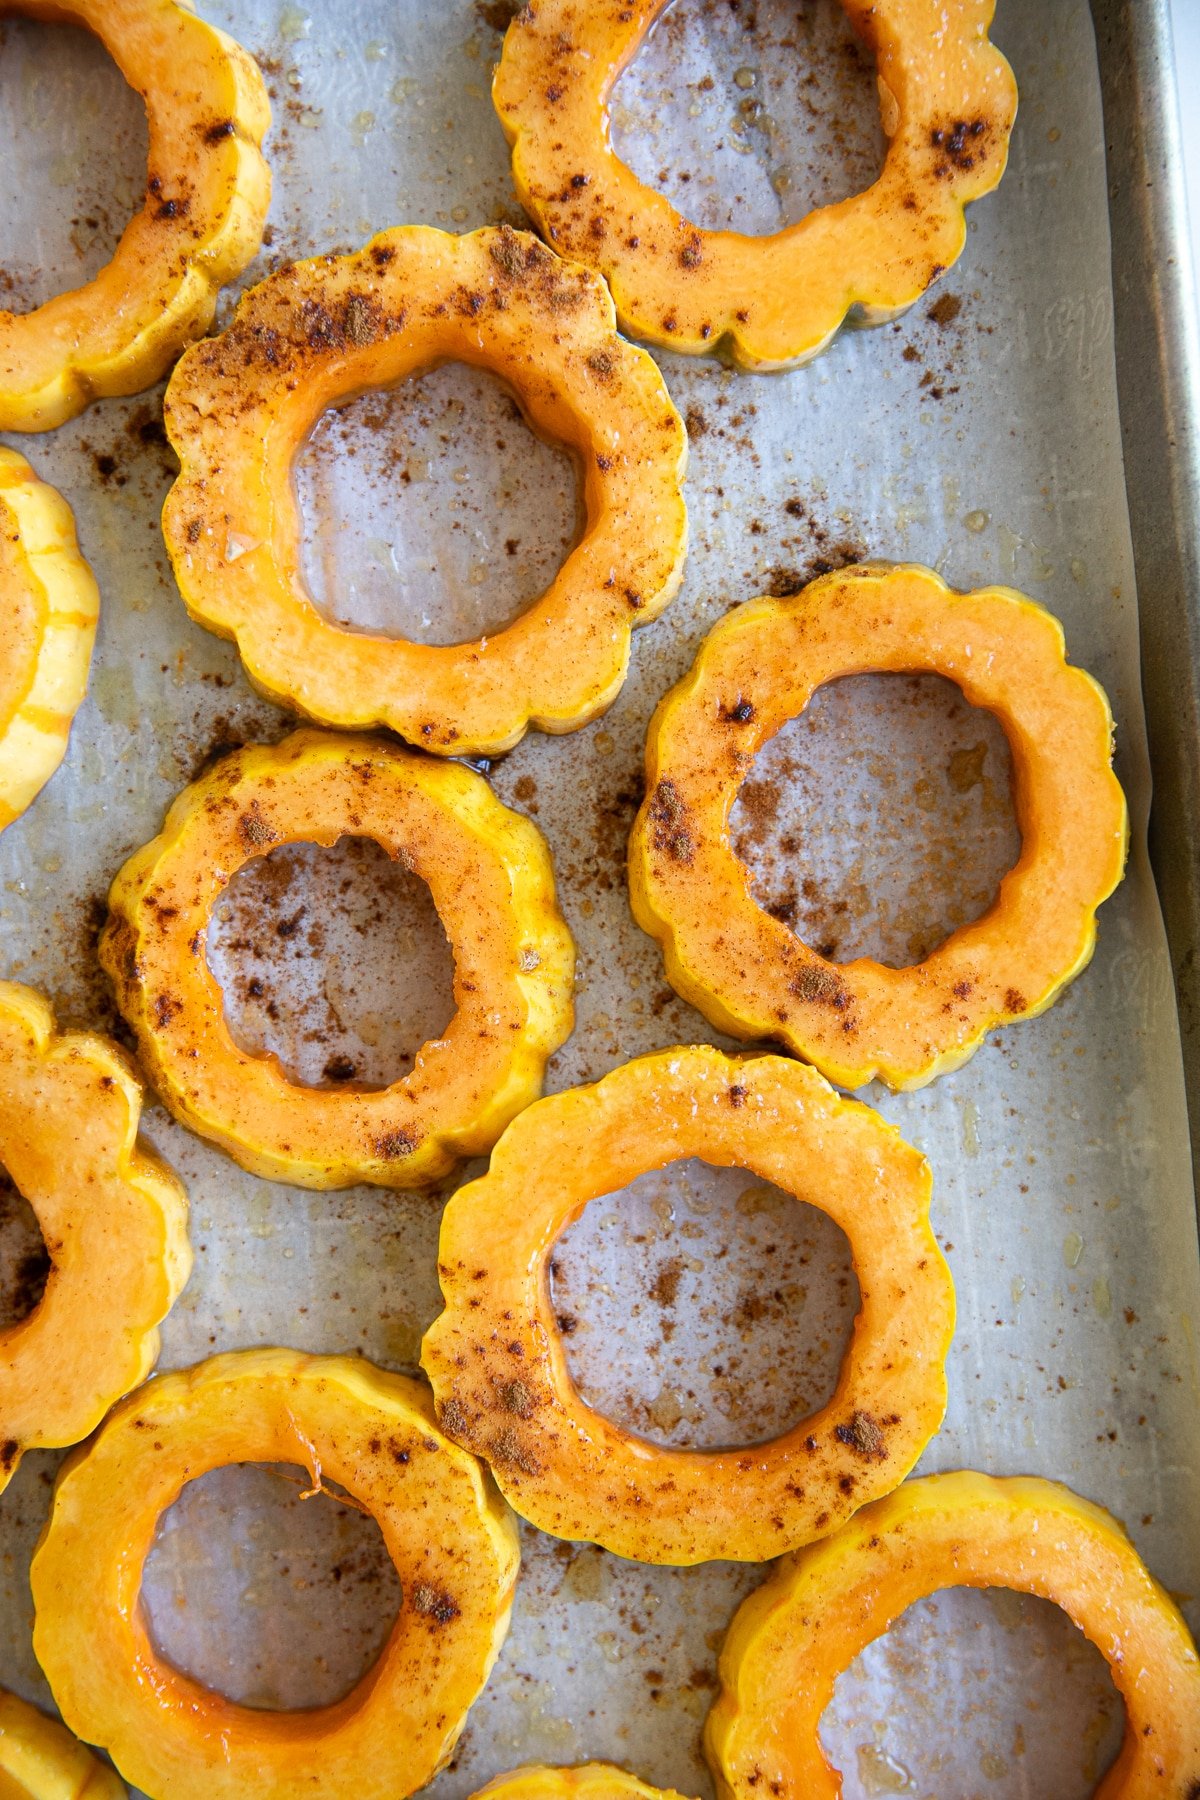 Sliced rings of delicata squash on a large baking sheet brushed with olive oil and sprinkled with ground cinnamon.